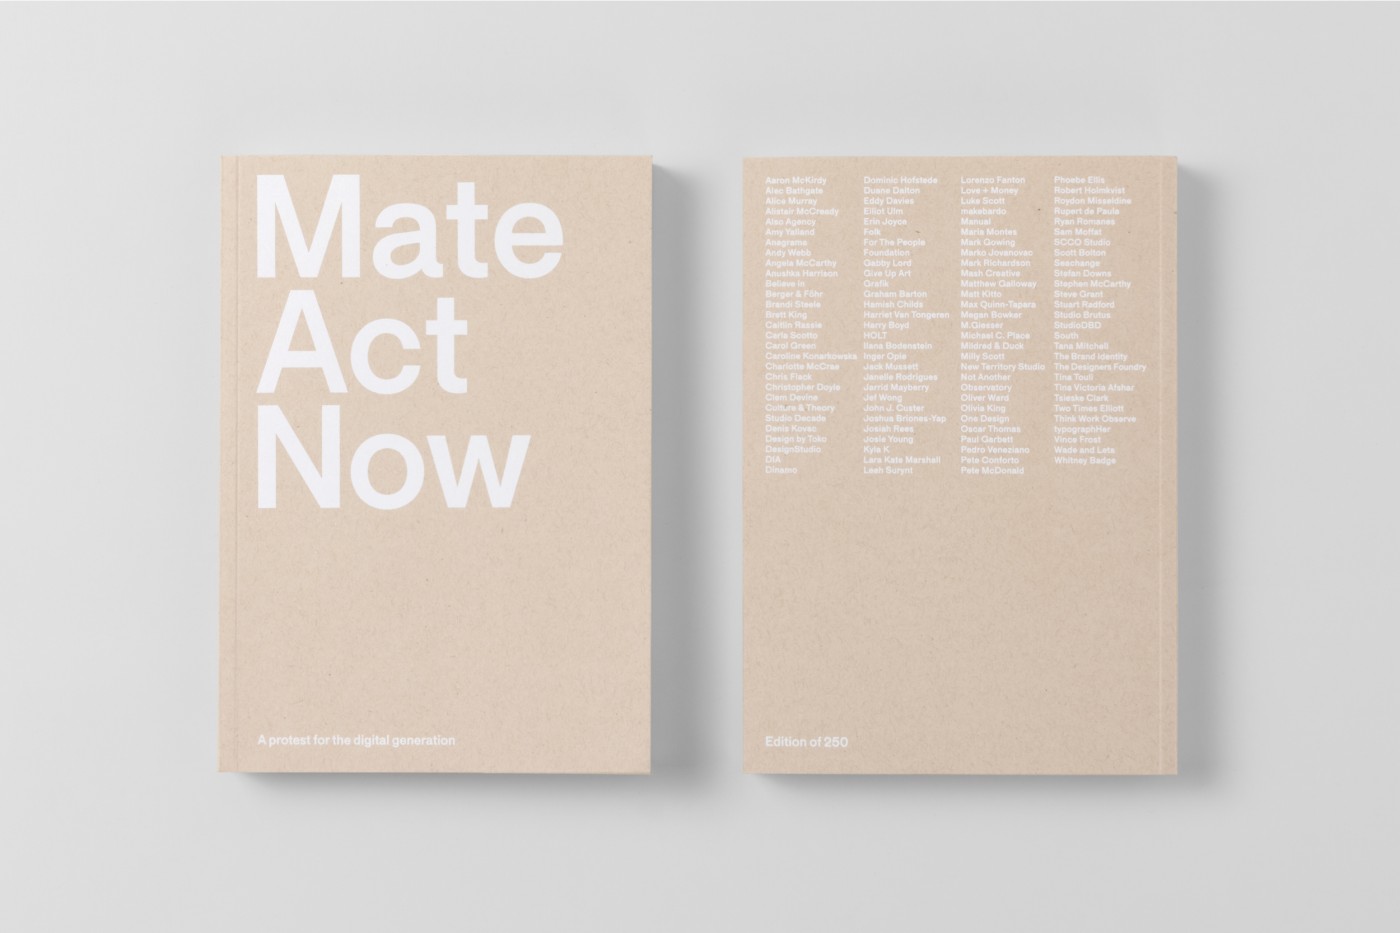 Image is a mockup of the Mate Act Now book cover (front and back) - white text on cream cover.